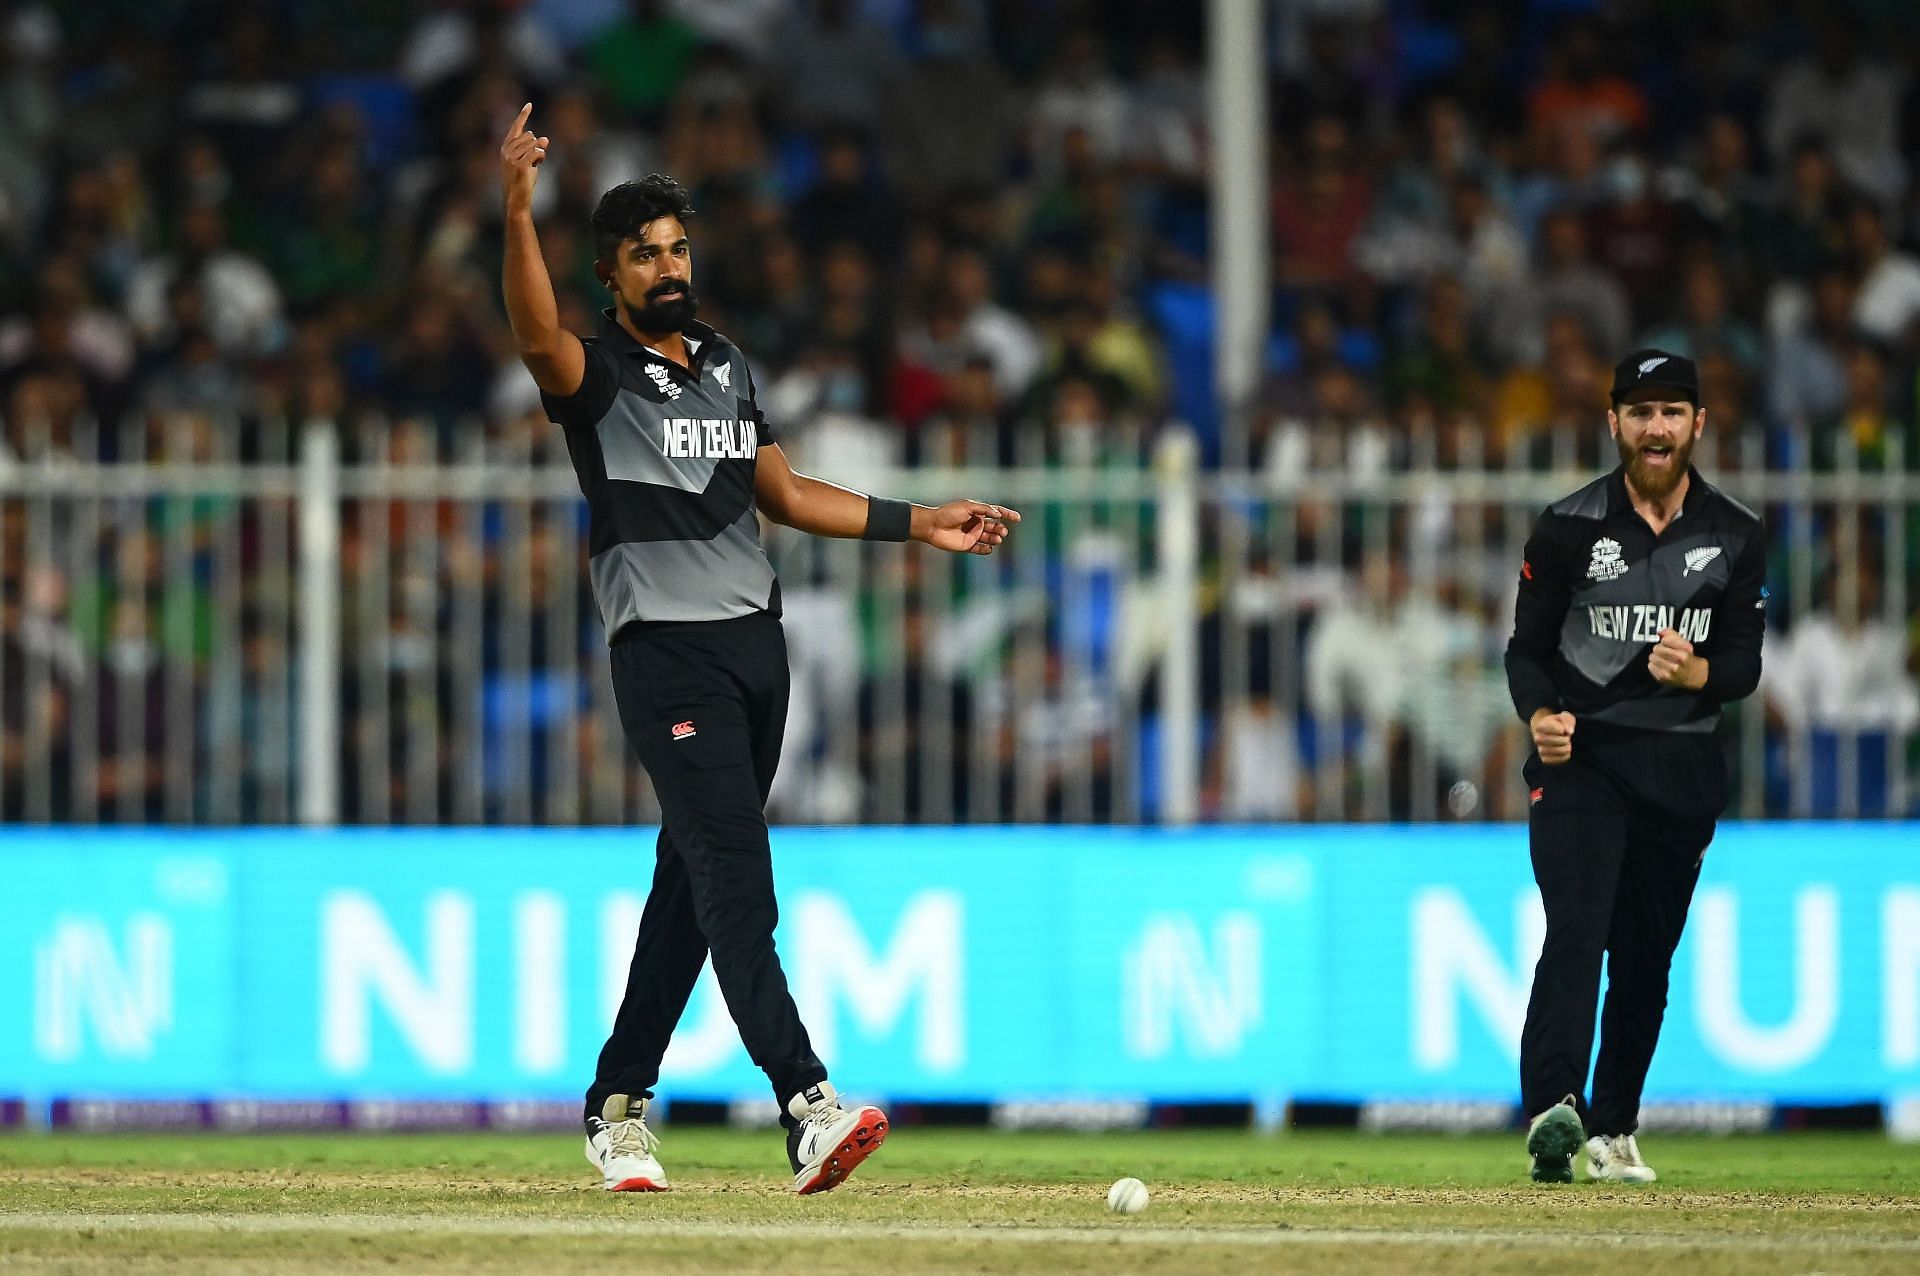 Ish Sodhi was awarded the Player of the Match in the India-New Zealand T20 World Cup match.